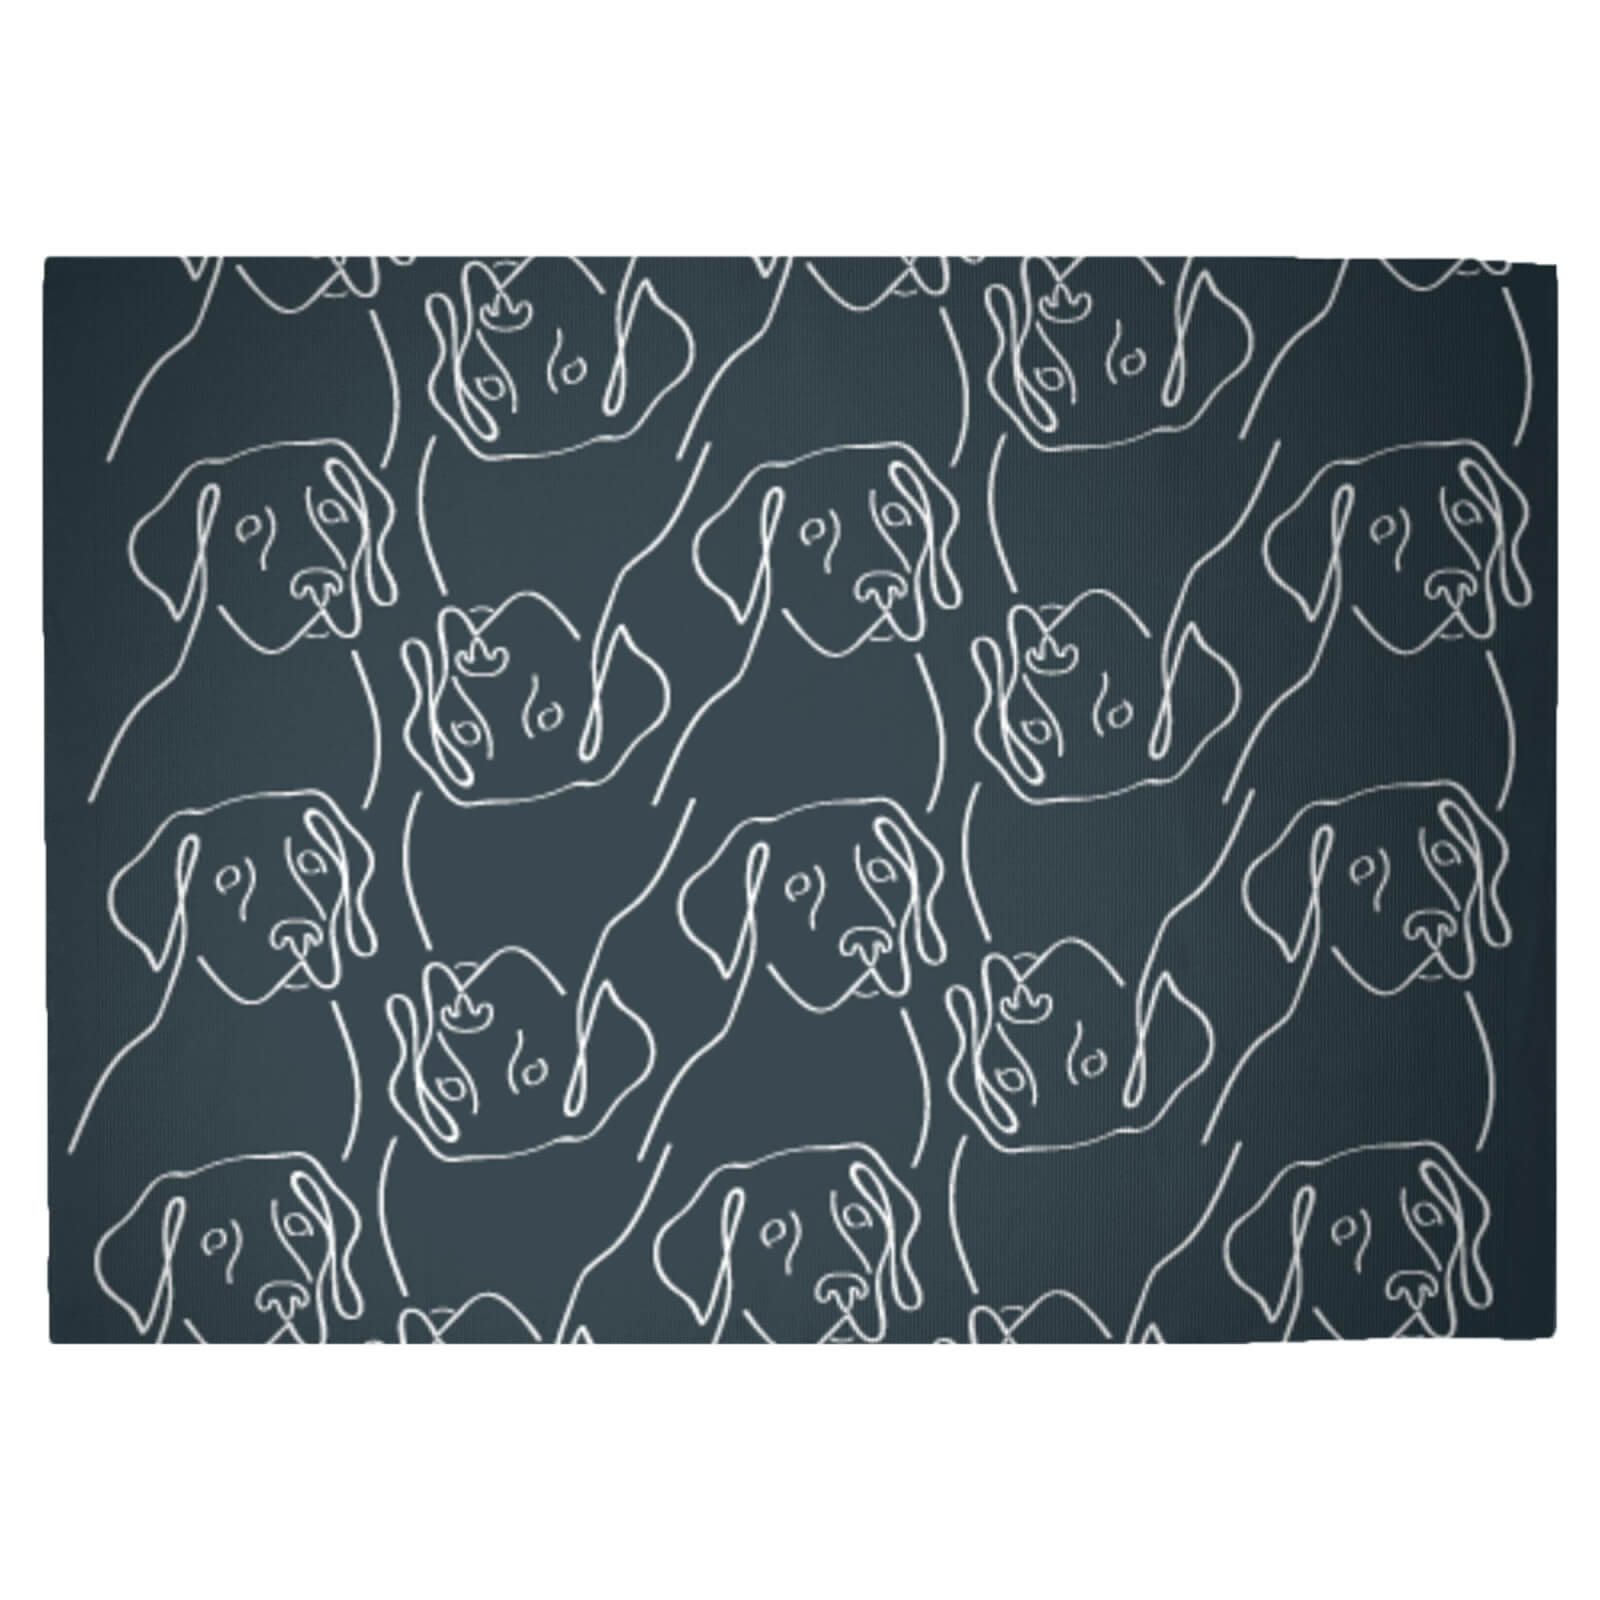 Abstract Dog Pattern Woven Rug - Large